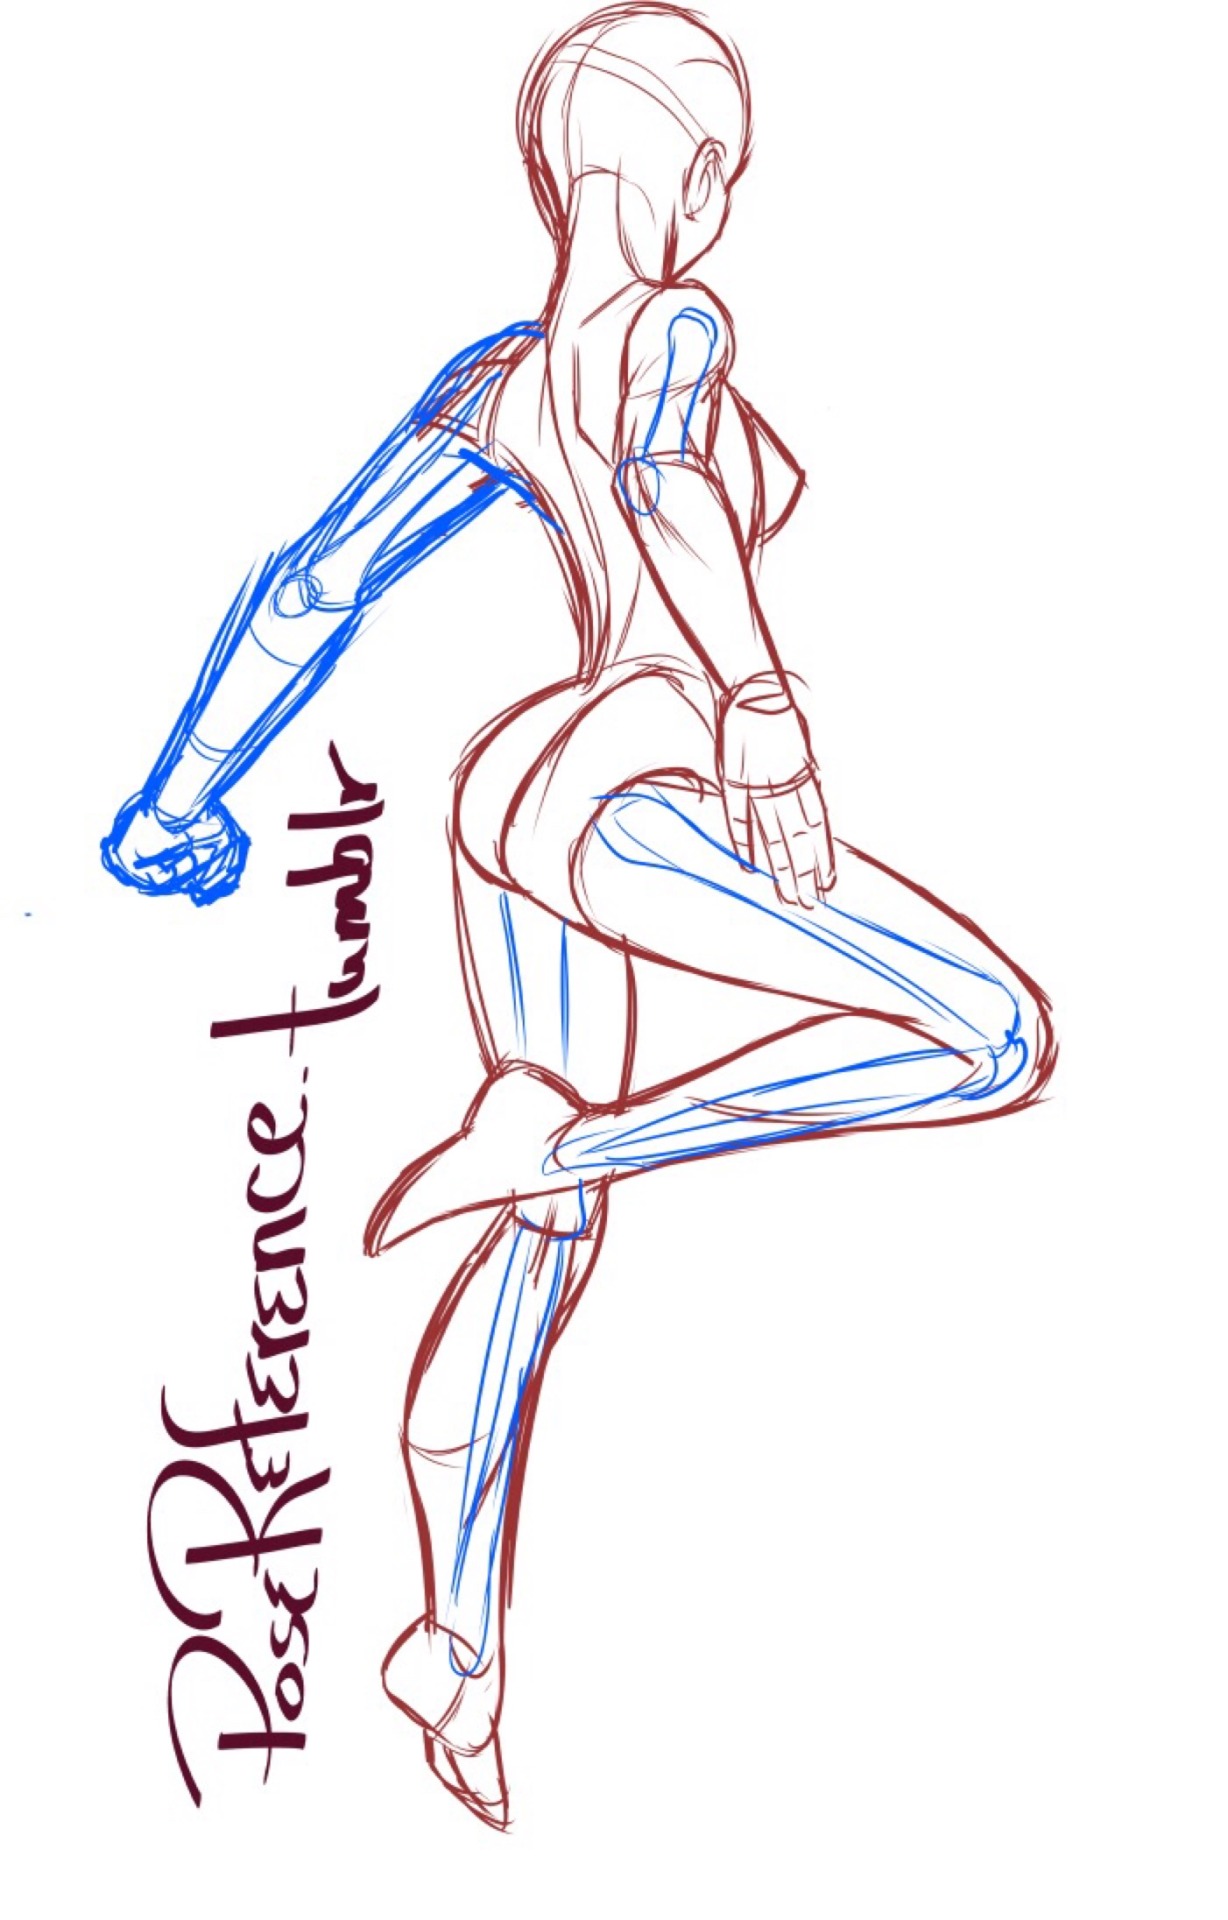 Featured image of post Anime Floating Pose References Www mediafire com file gfnpnz7 anime drawings sketches cute drawings anime poses reference couple poses reference sketch poses poses references art poses drawing base